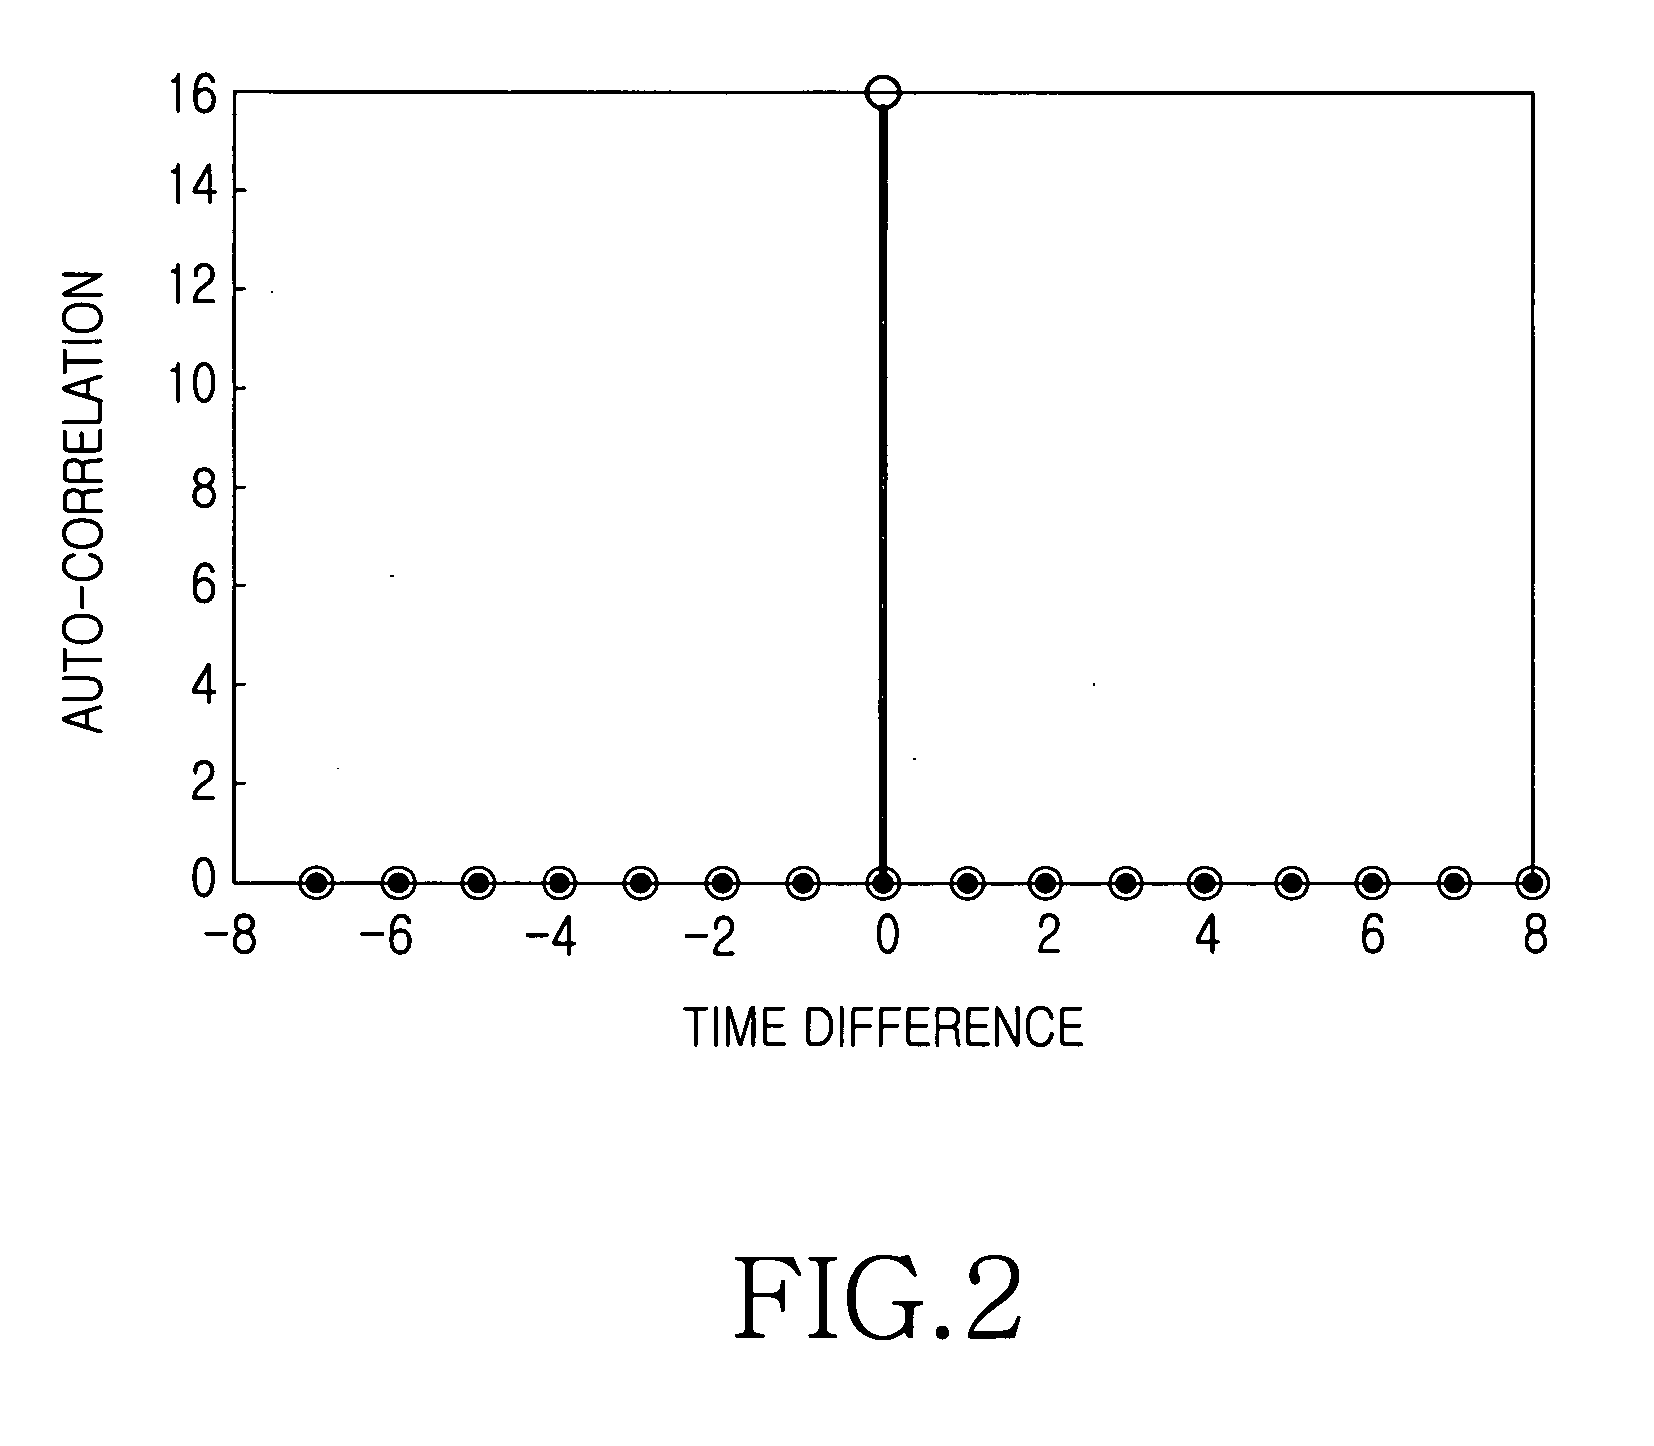 Method of transmitting and receiving preamble sequences in an orthogonal frequency division multiplexing communication system using multiple input multiple output scheme